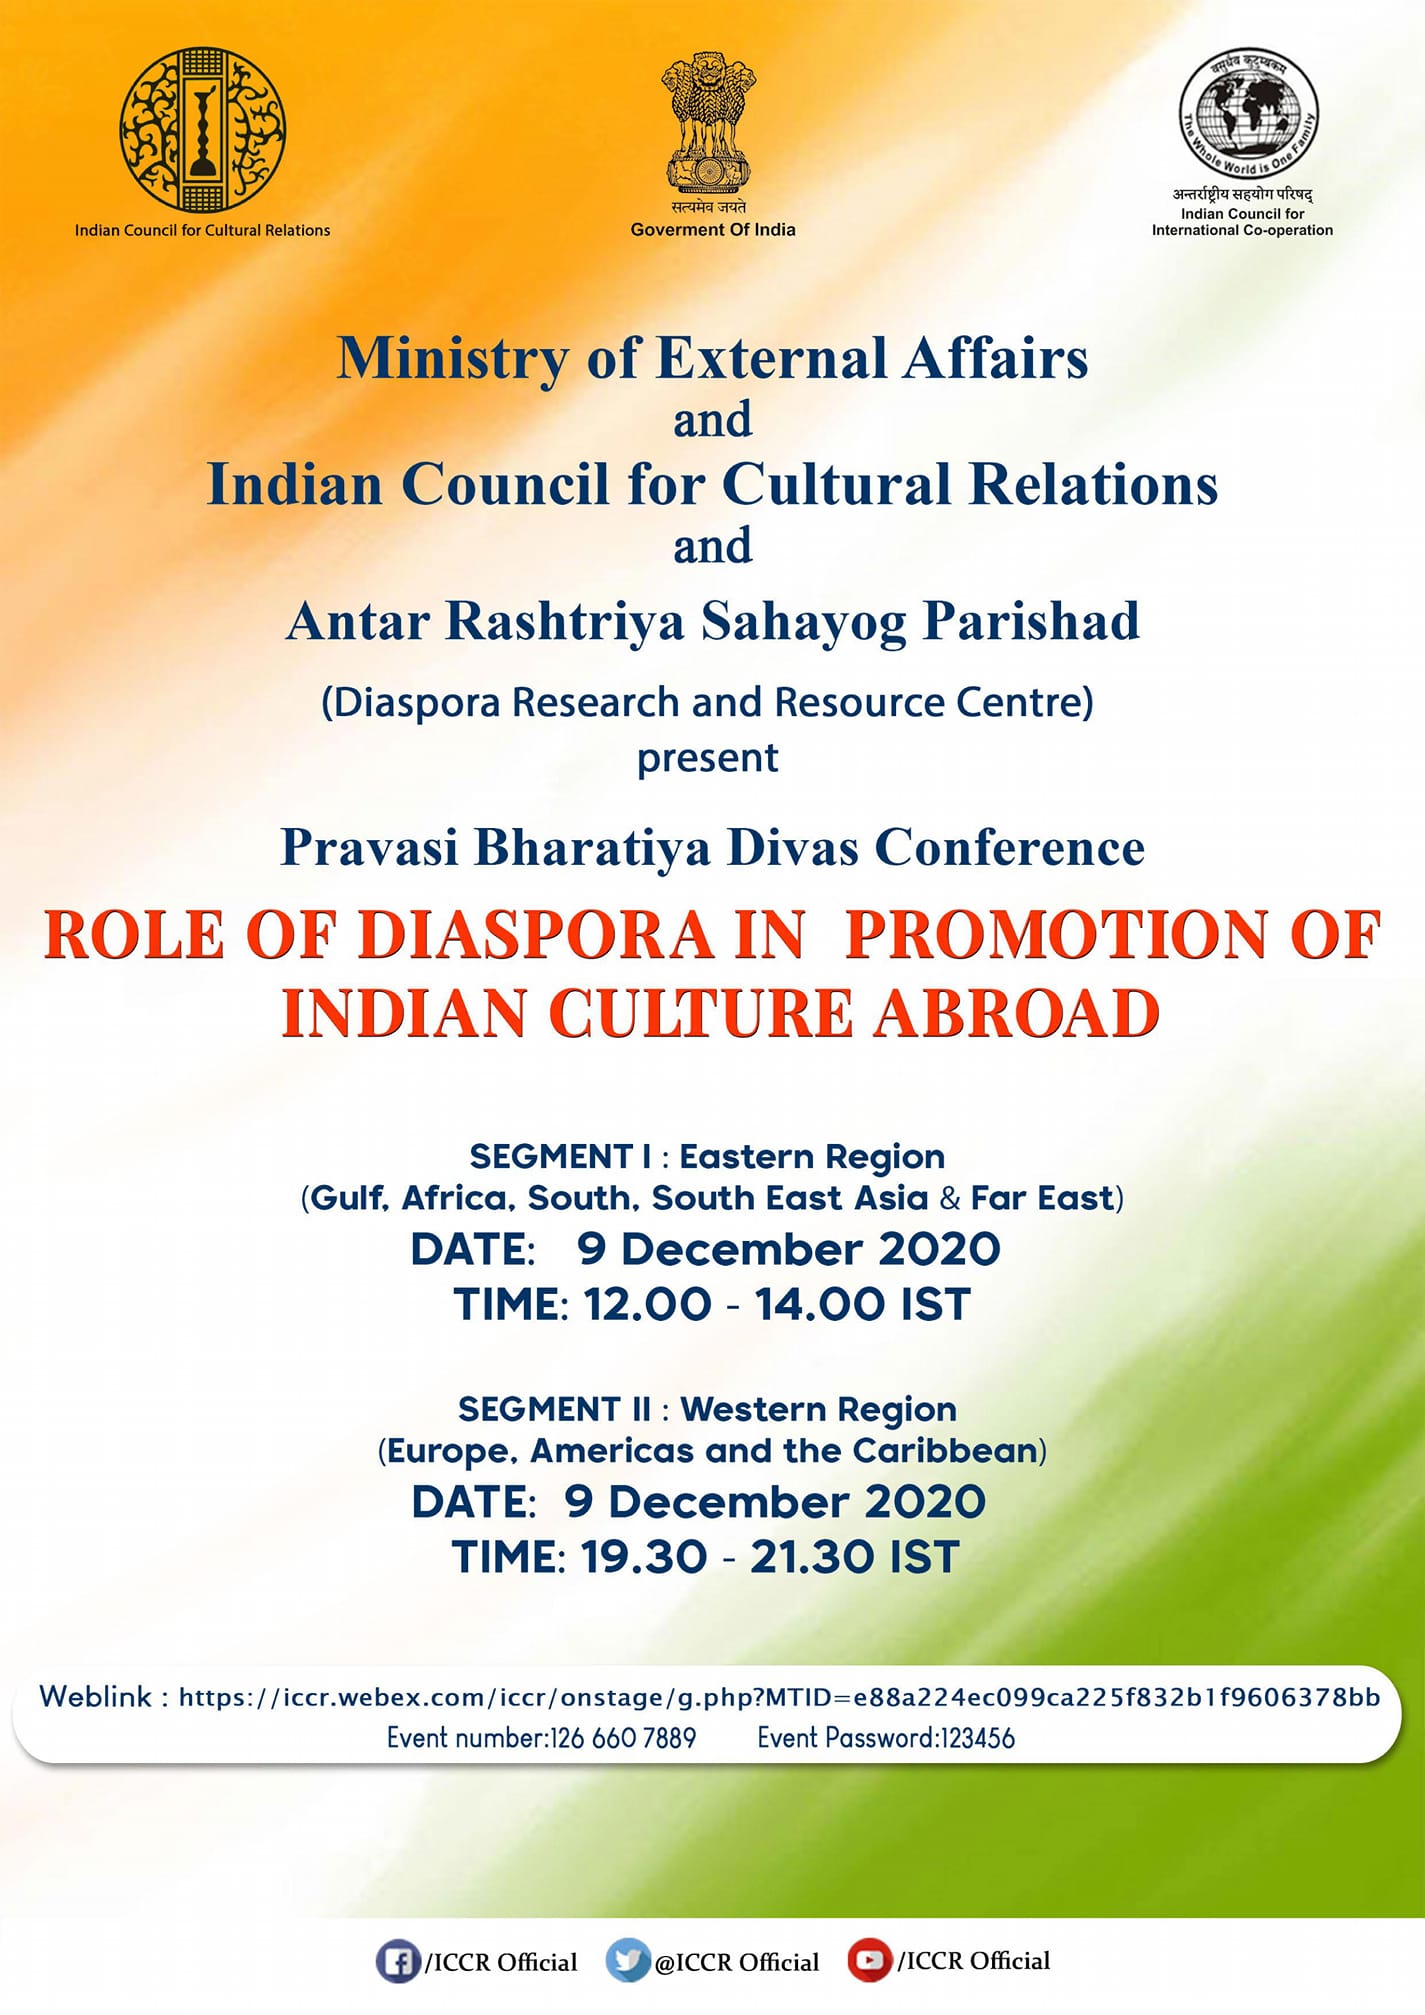 Virtual conference on "Role of Diaspora in promotion of Indian culture abroad"